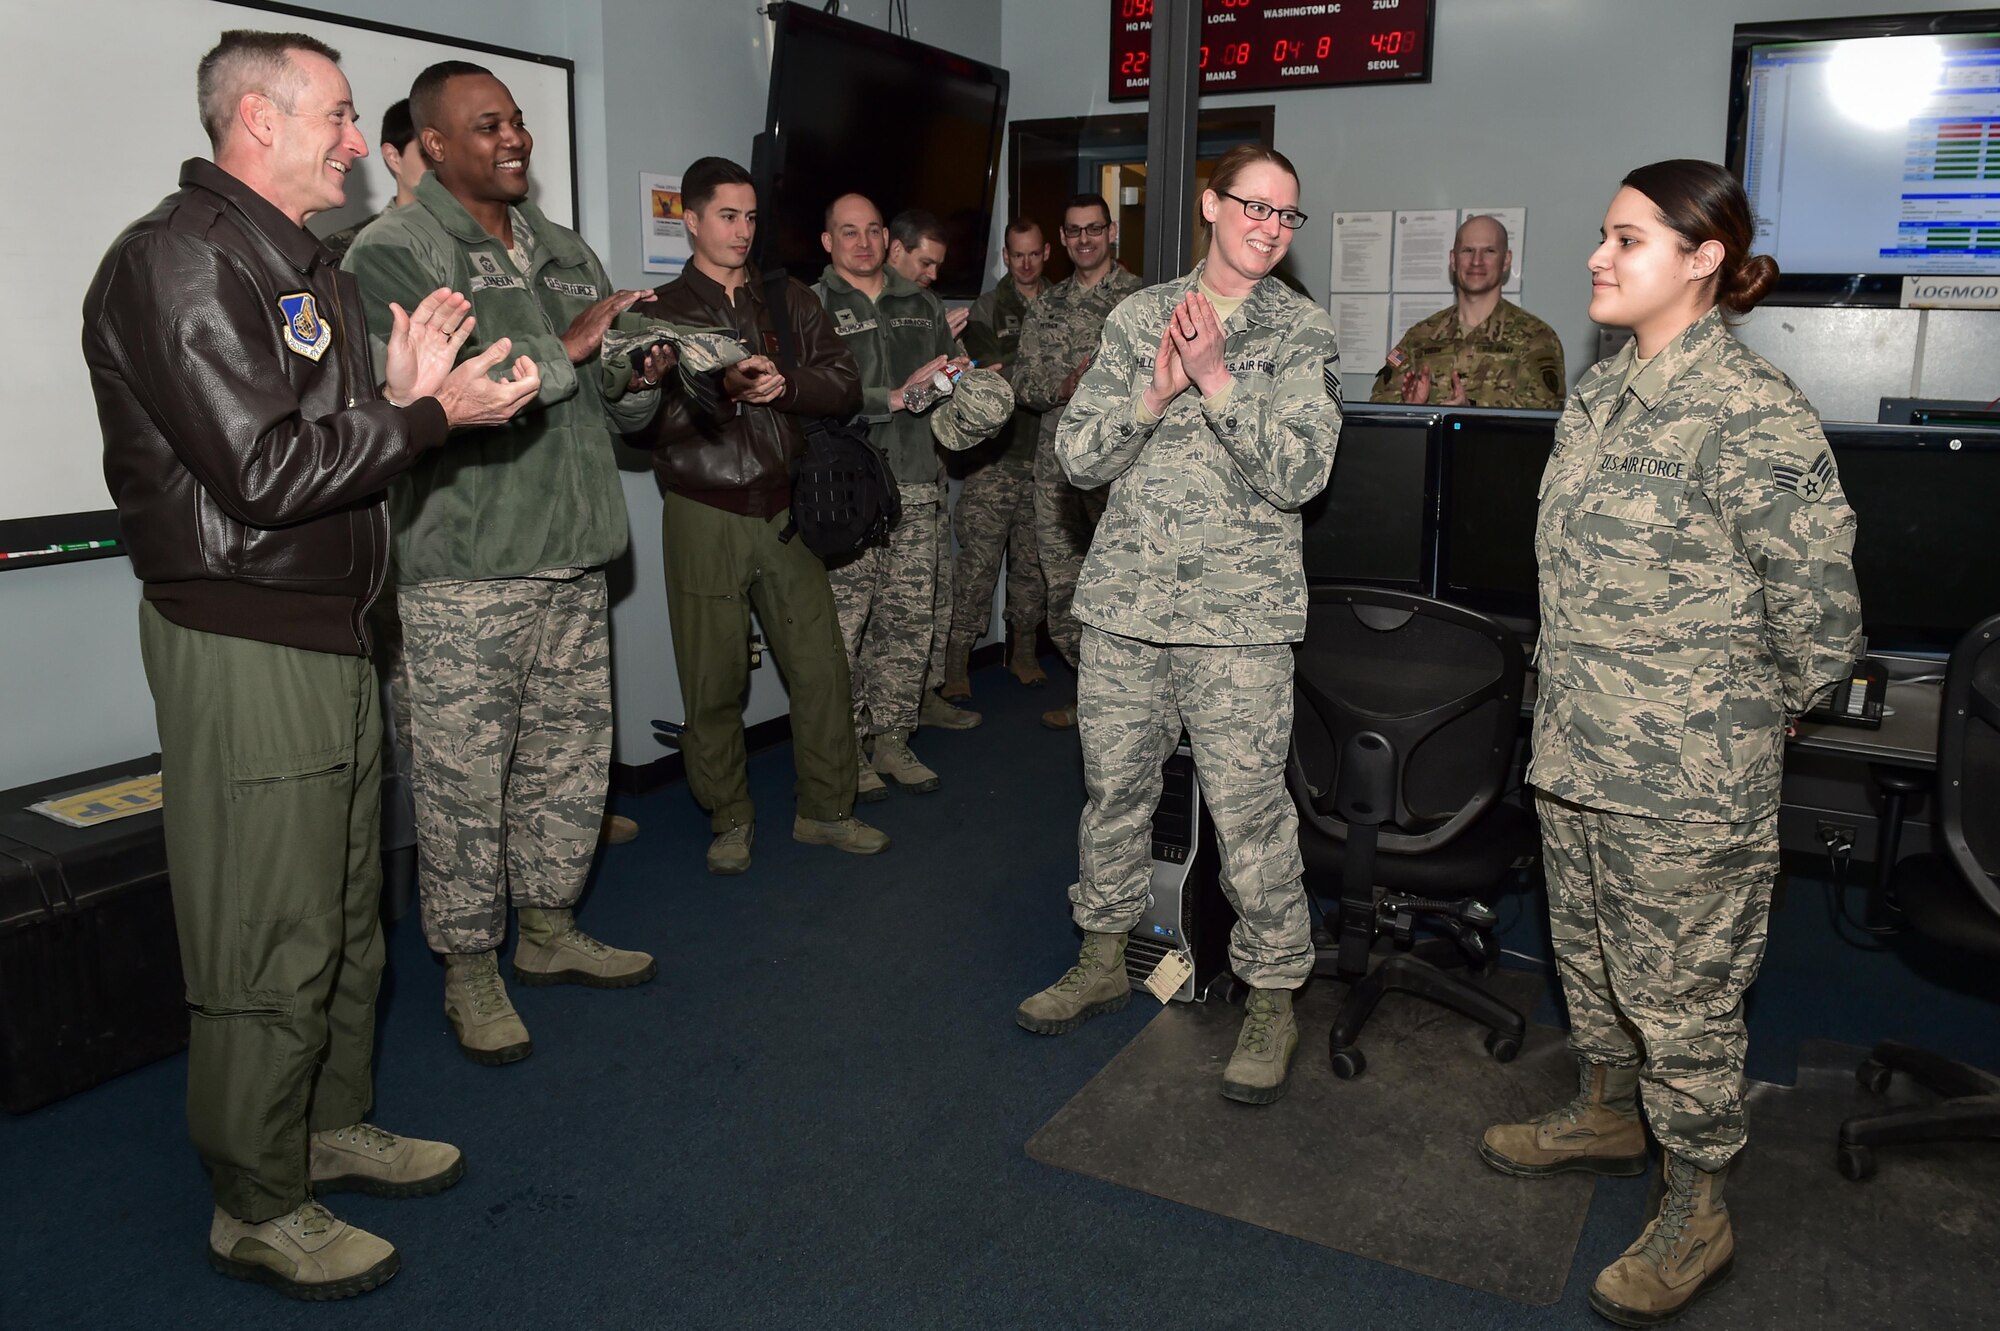 U.S. Air Force Gen. Terrence J. O'Shaughnessy, Pacific Air Forces commander, applauds an Airman after presenting her with a commander’s coin at the Joint Mobility Complex on Joint Base Elmendorf-Richardson, Alaska, as he toured the base, Feb. 7, 2017. O’Shaughnessy toured various facilities throughout the installation to meet with Airmen and get a first-hand look at the broad spectrum of JBER mission sets.